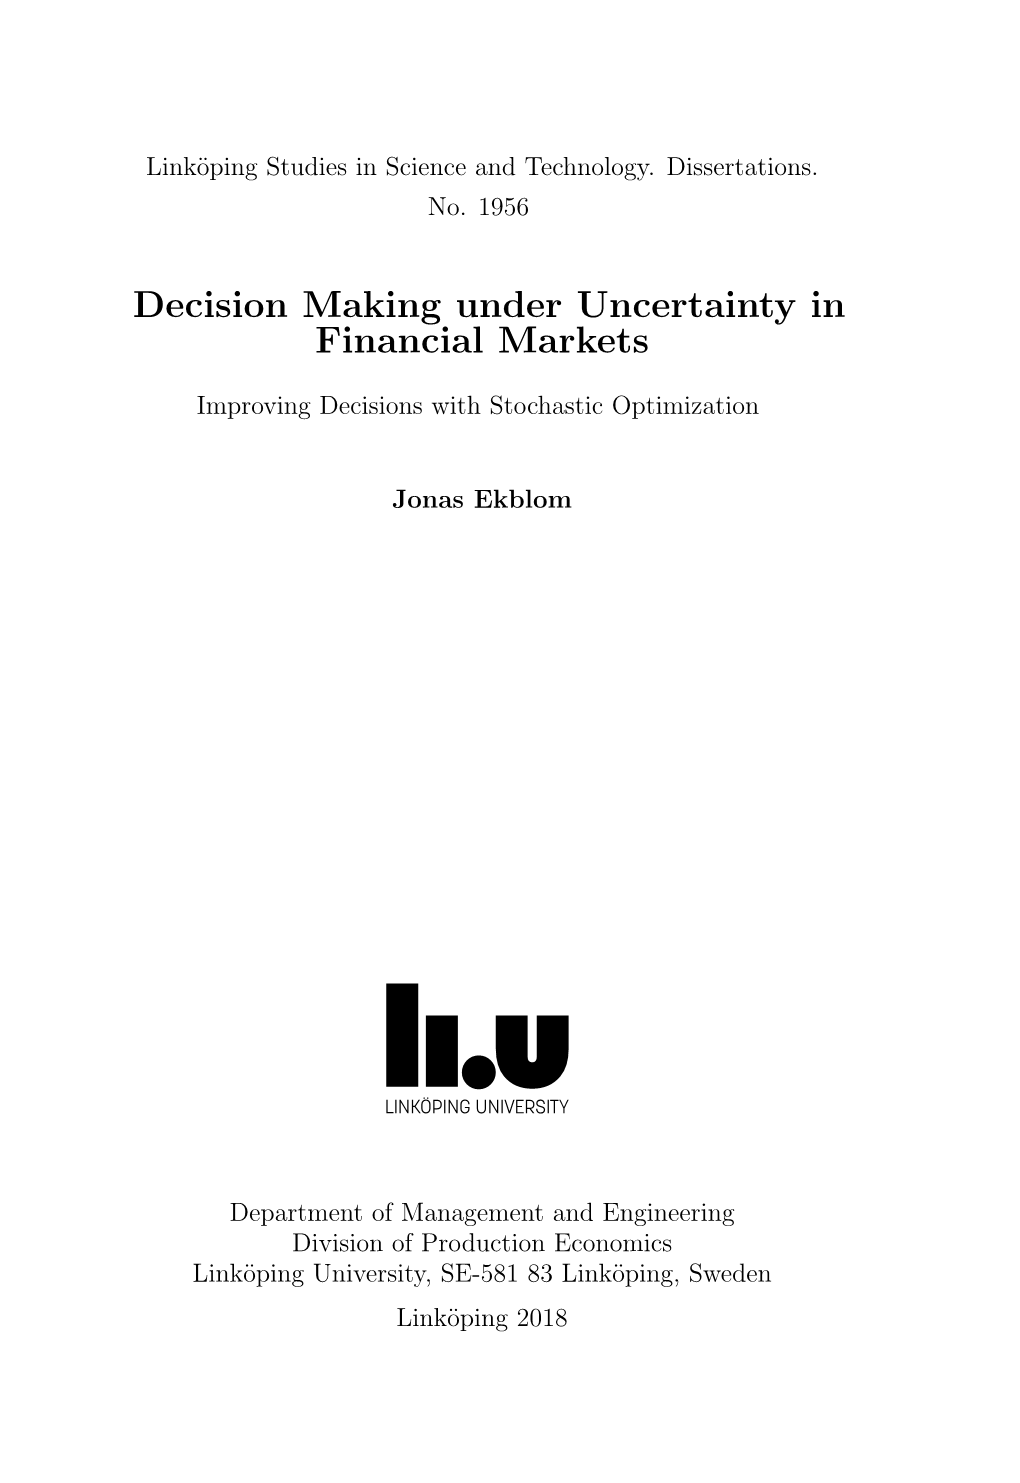 Decision Making Under Uncertainty in Financial Markets